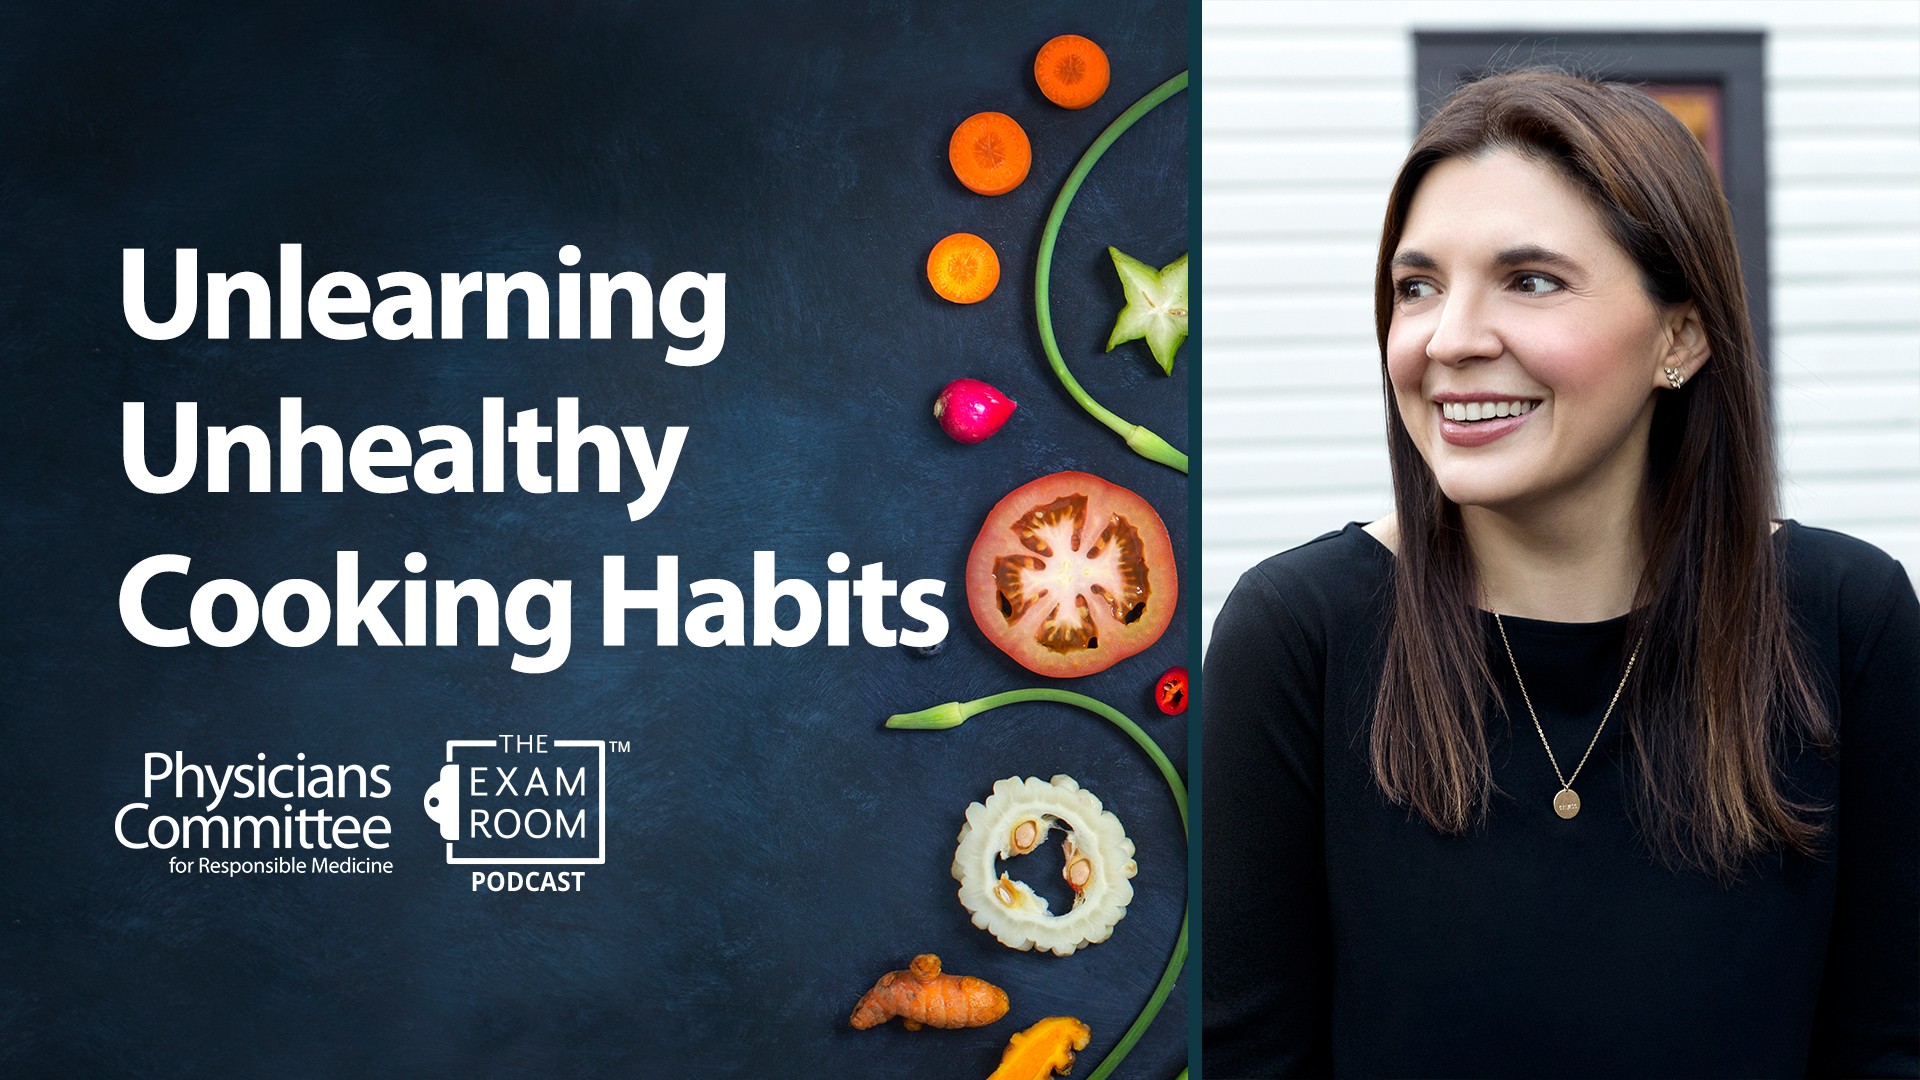 Unlearn Unhealthy Cooking Habits